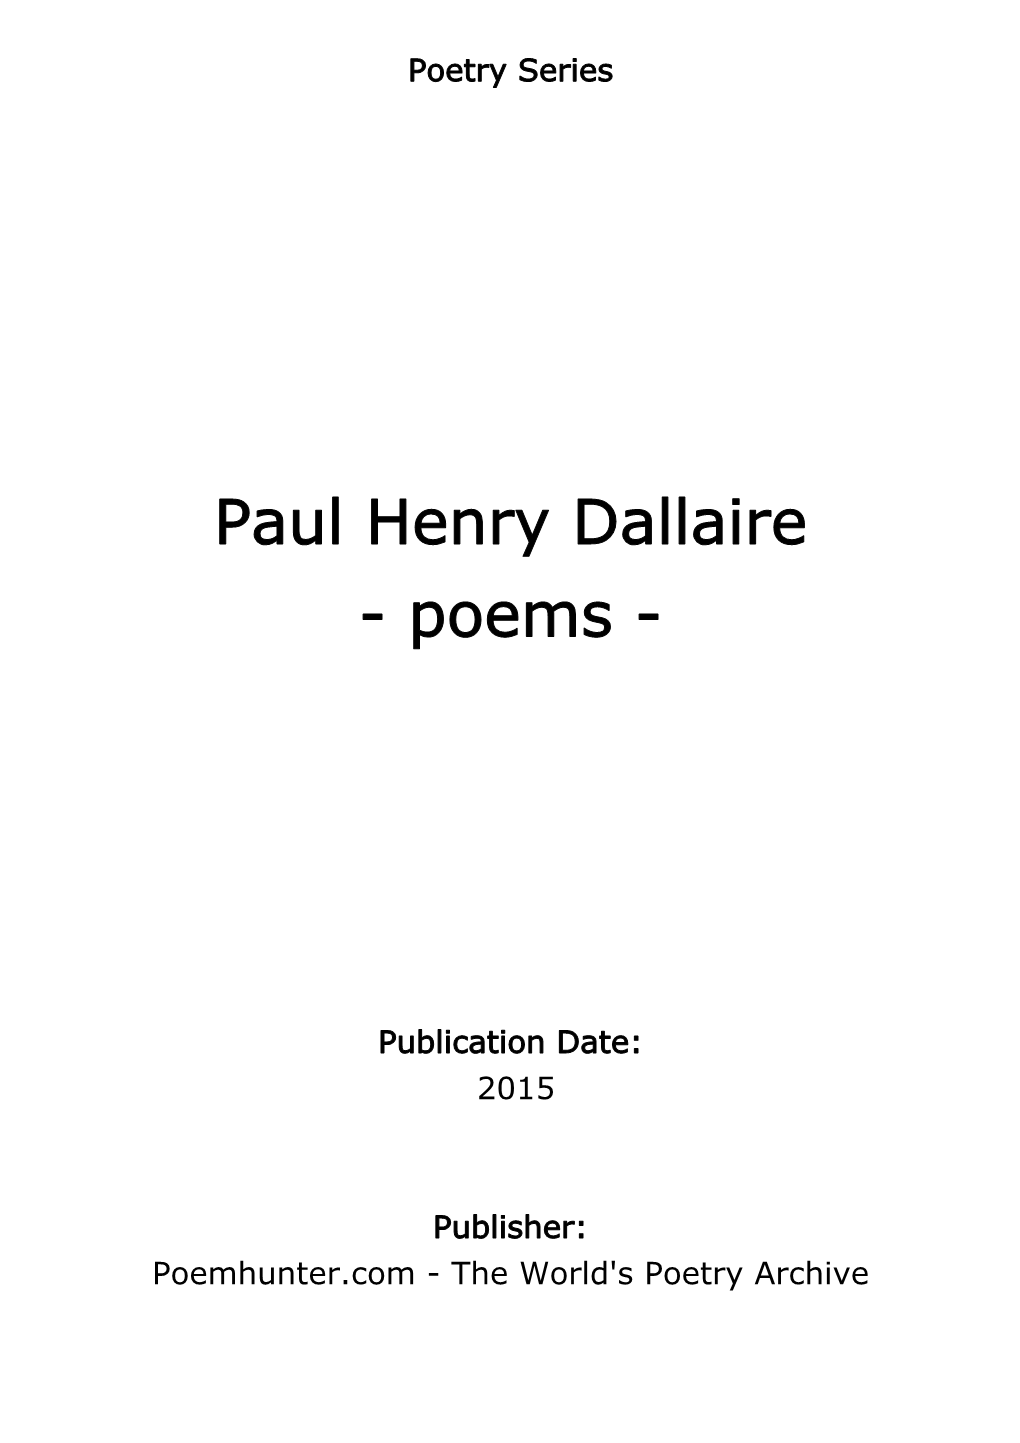 Paul Henry Dallaire - Poems